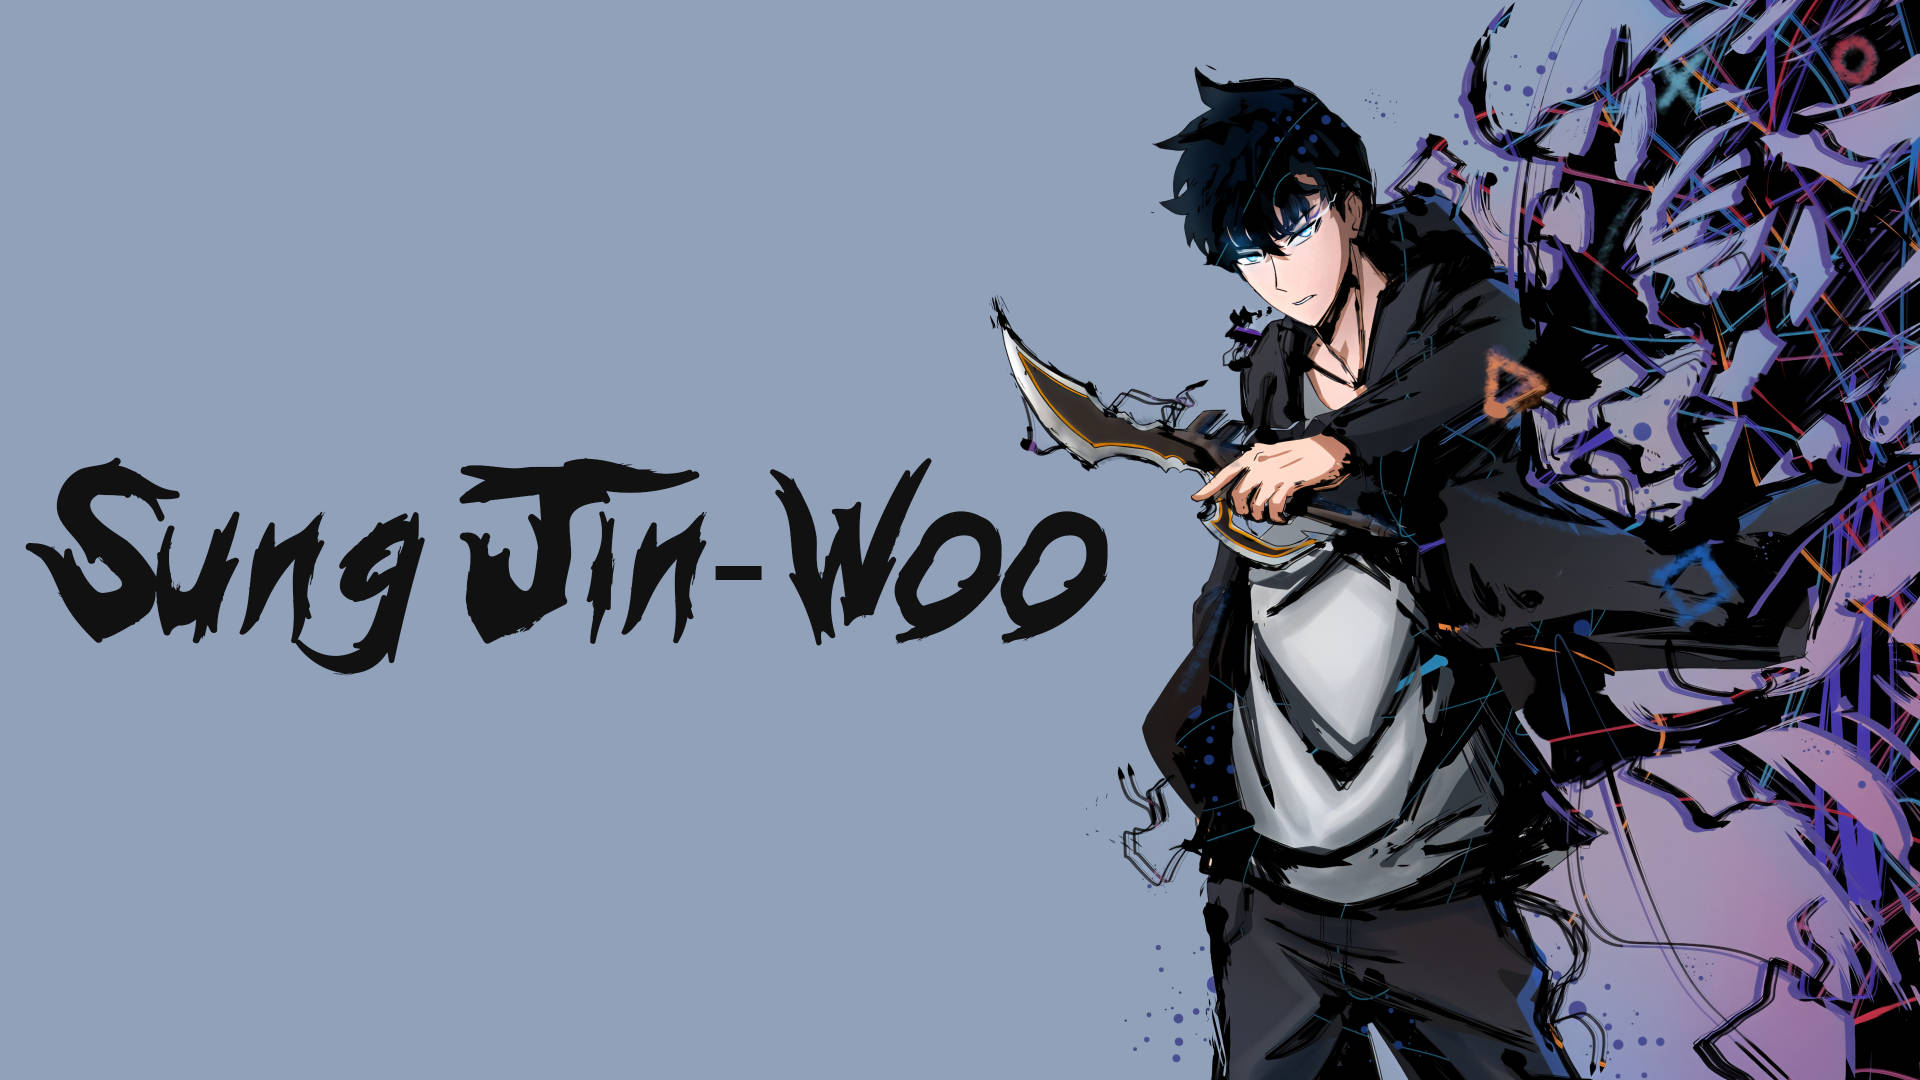 Solo Leveling Jin-woo Casual Background